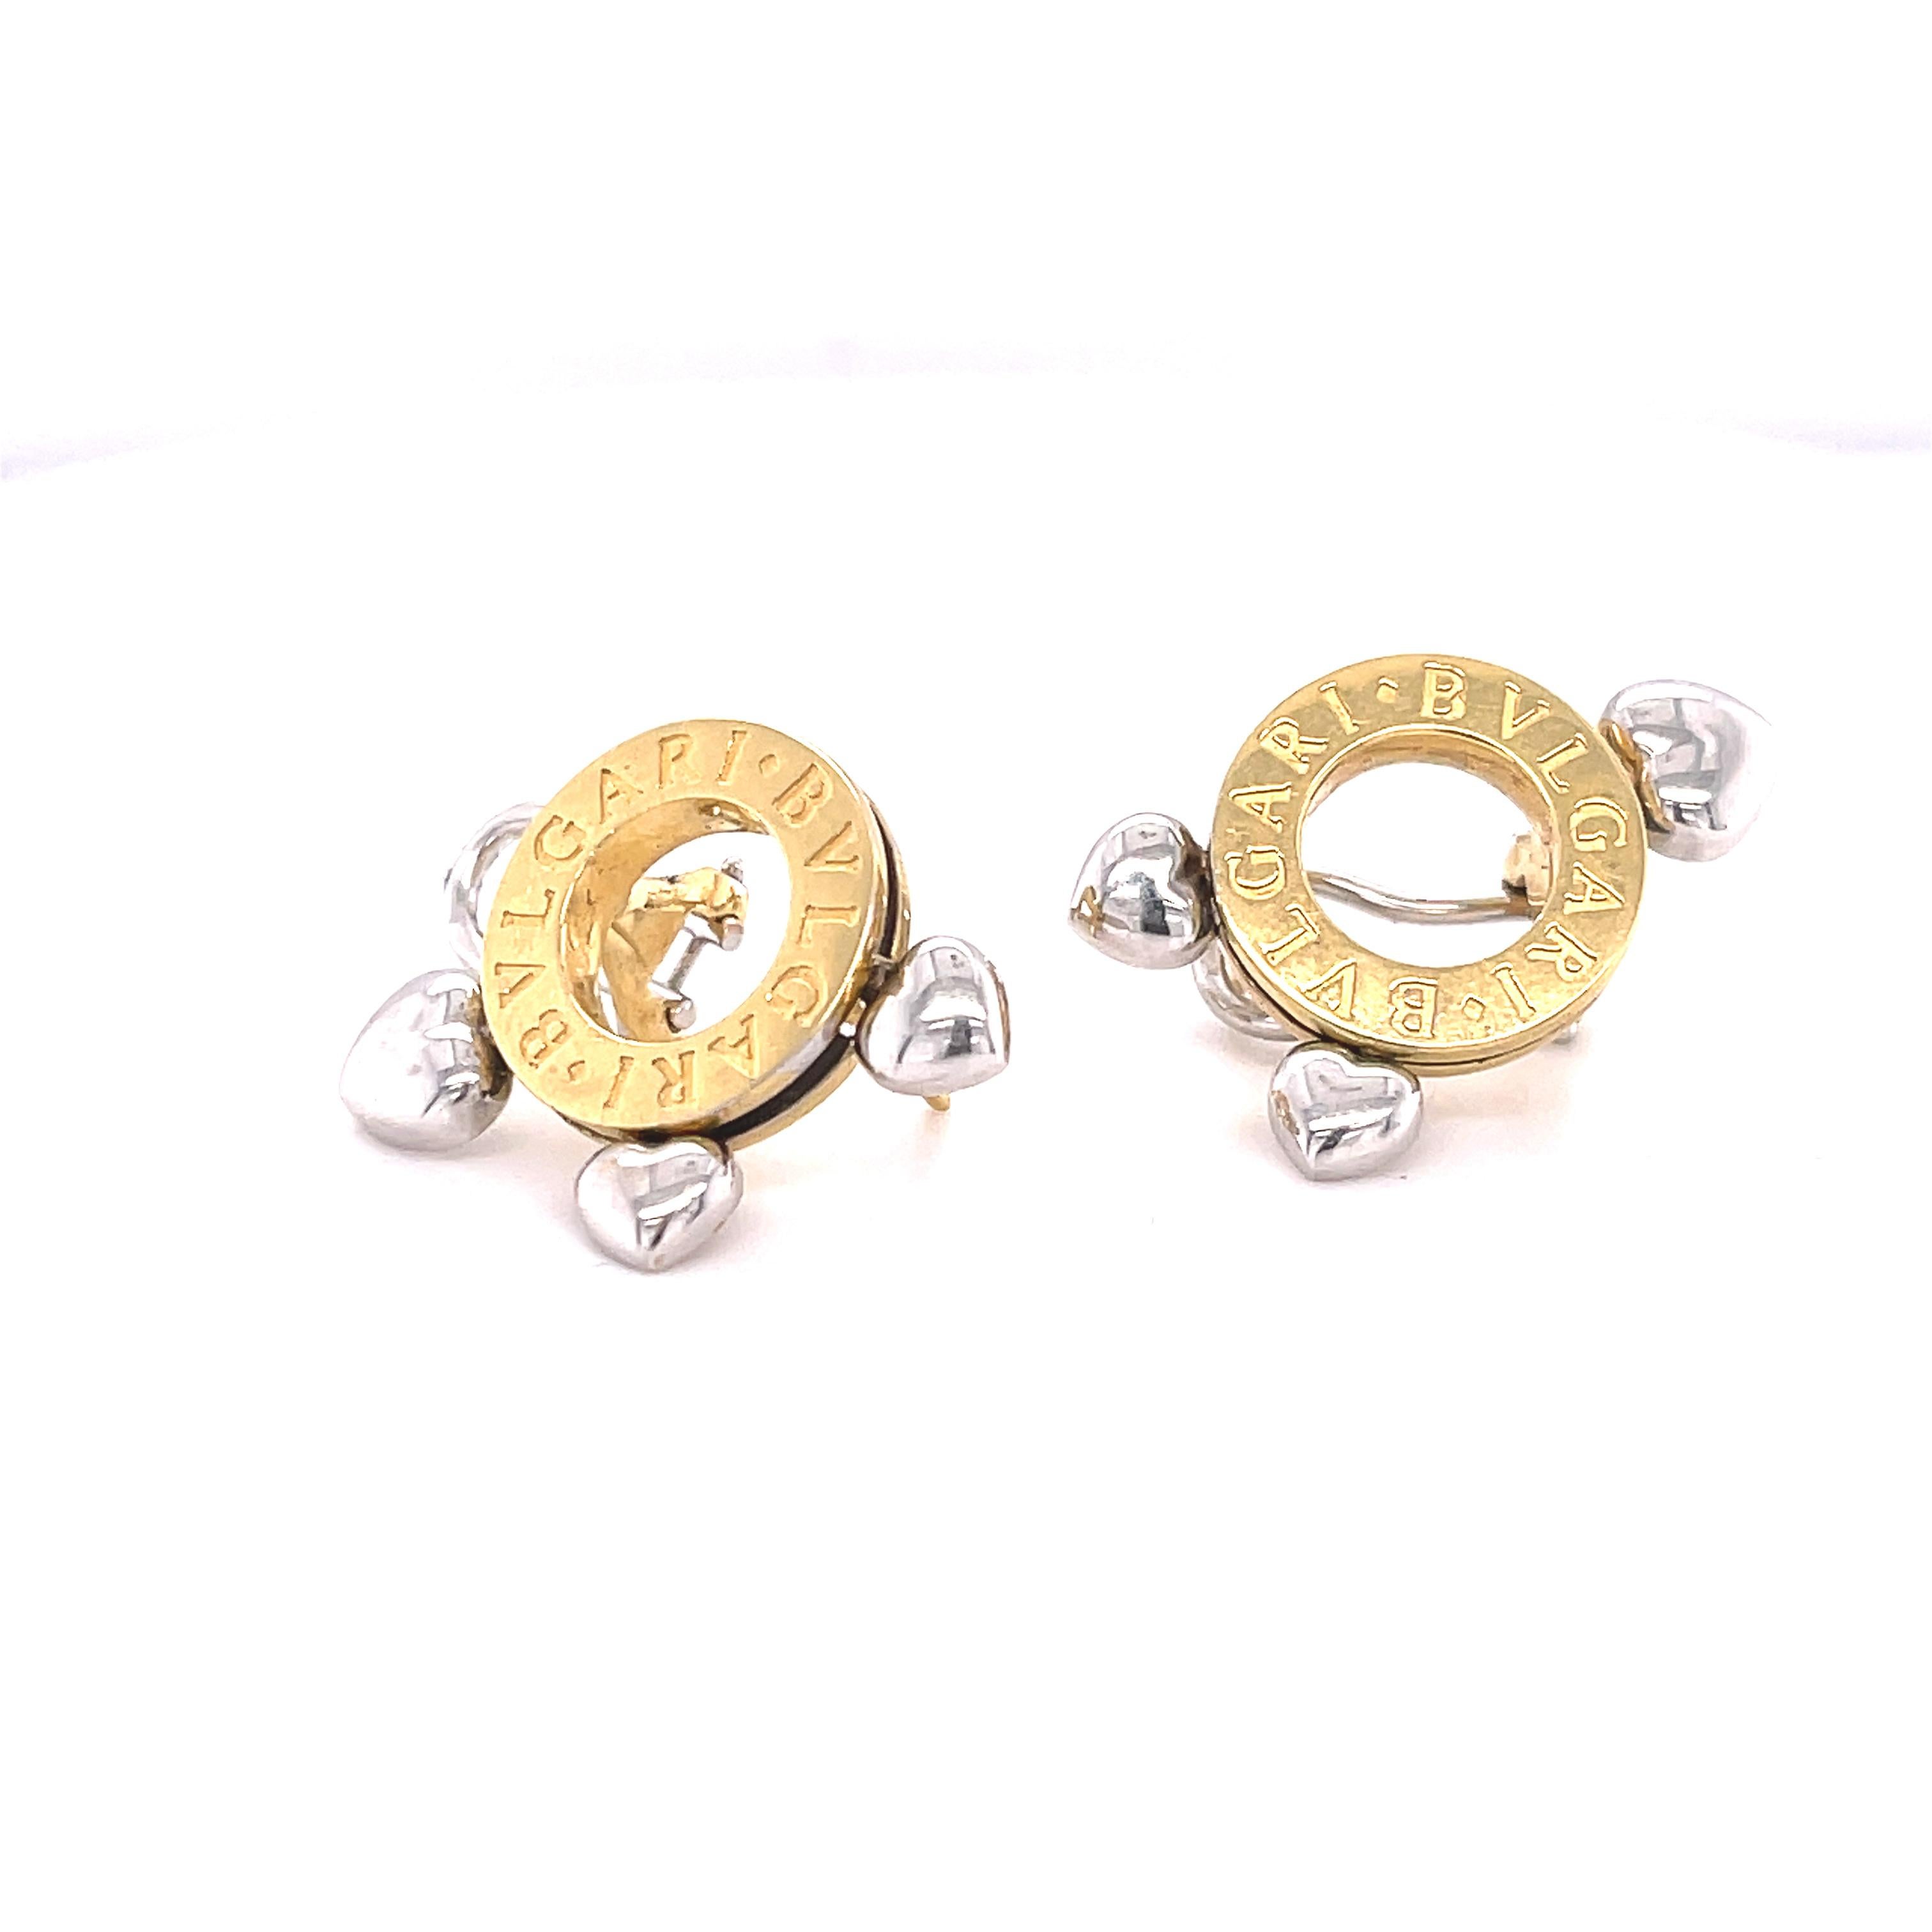 These is a beautiful set of earrings! Bvlgari is clearly displayed o the yellow gold circle of the main part of the earrings. Then three white gold hearts dangle at the bottom. The hearts can move around the whole earrings. 

• Signed Bulgari